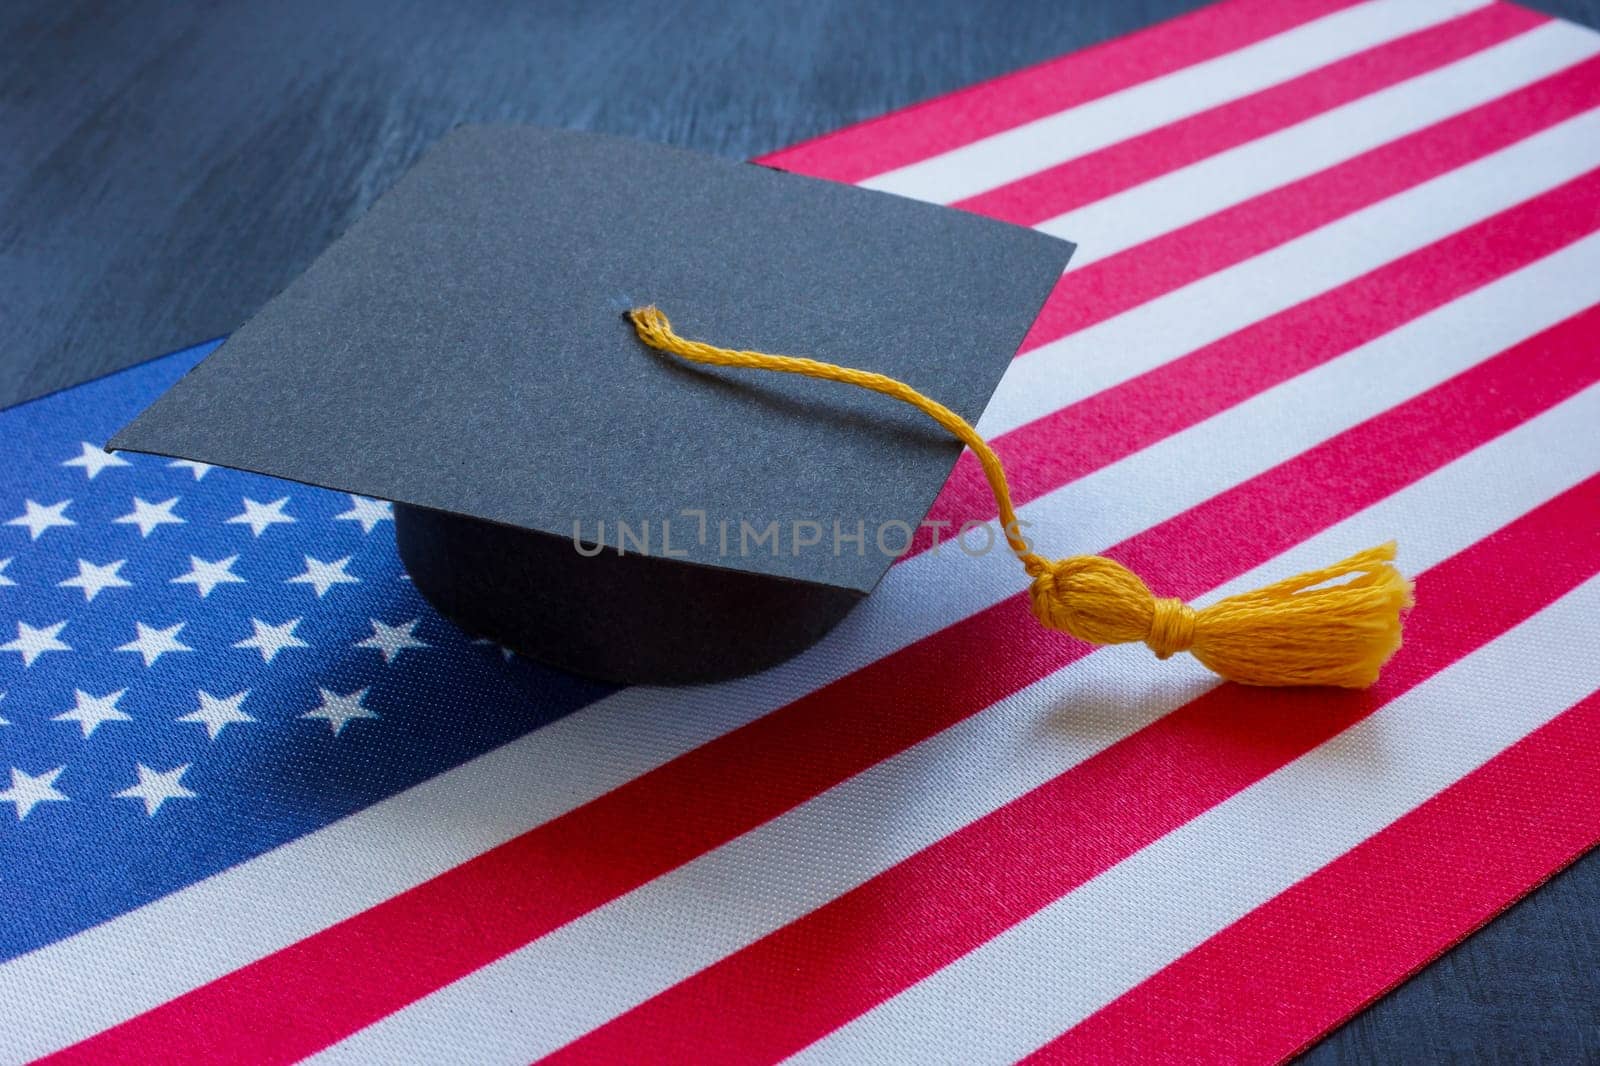 Student hat on the US flag as symbol of education.